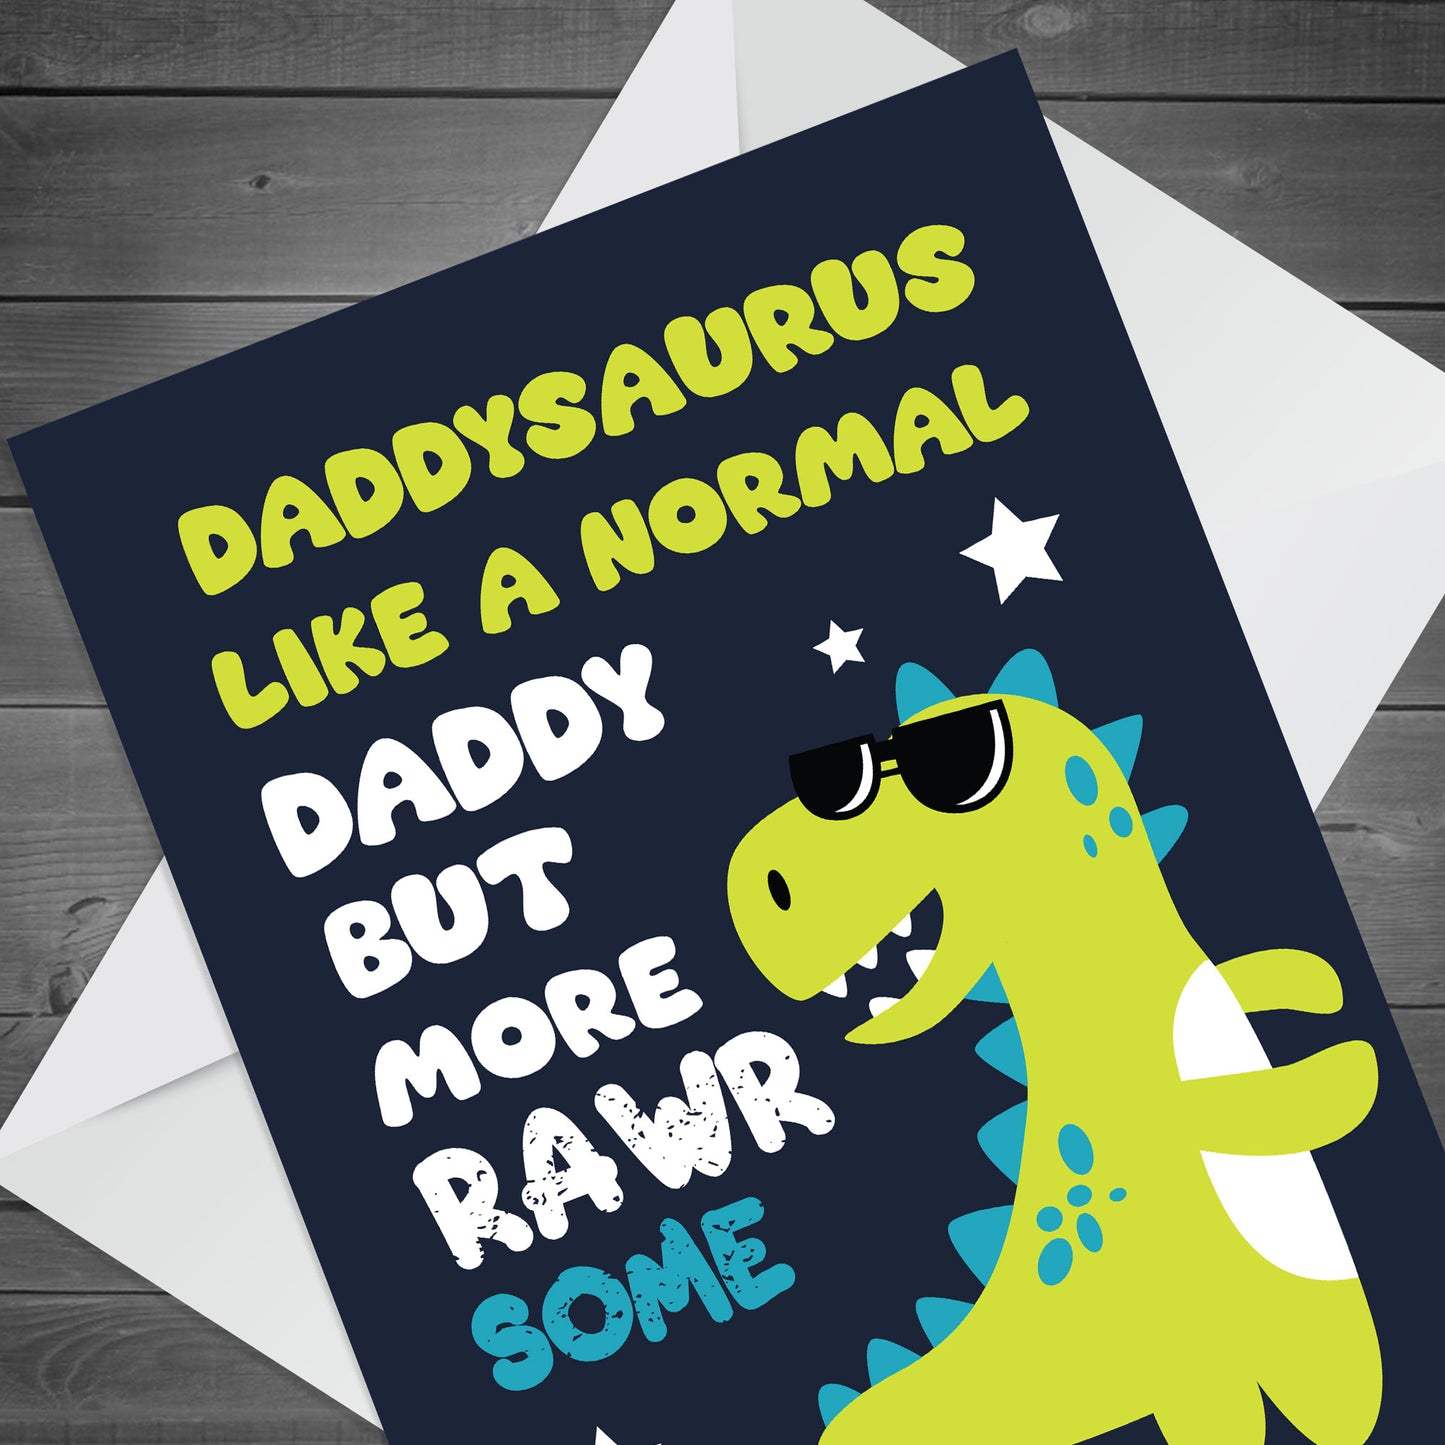 Fathers Day Cards for Daddy Daddysauru Daddy Father's Day Card